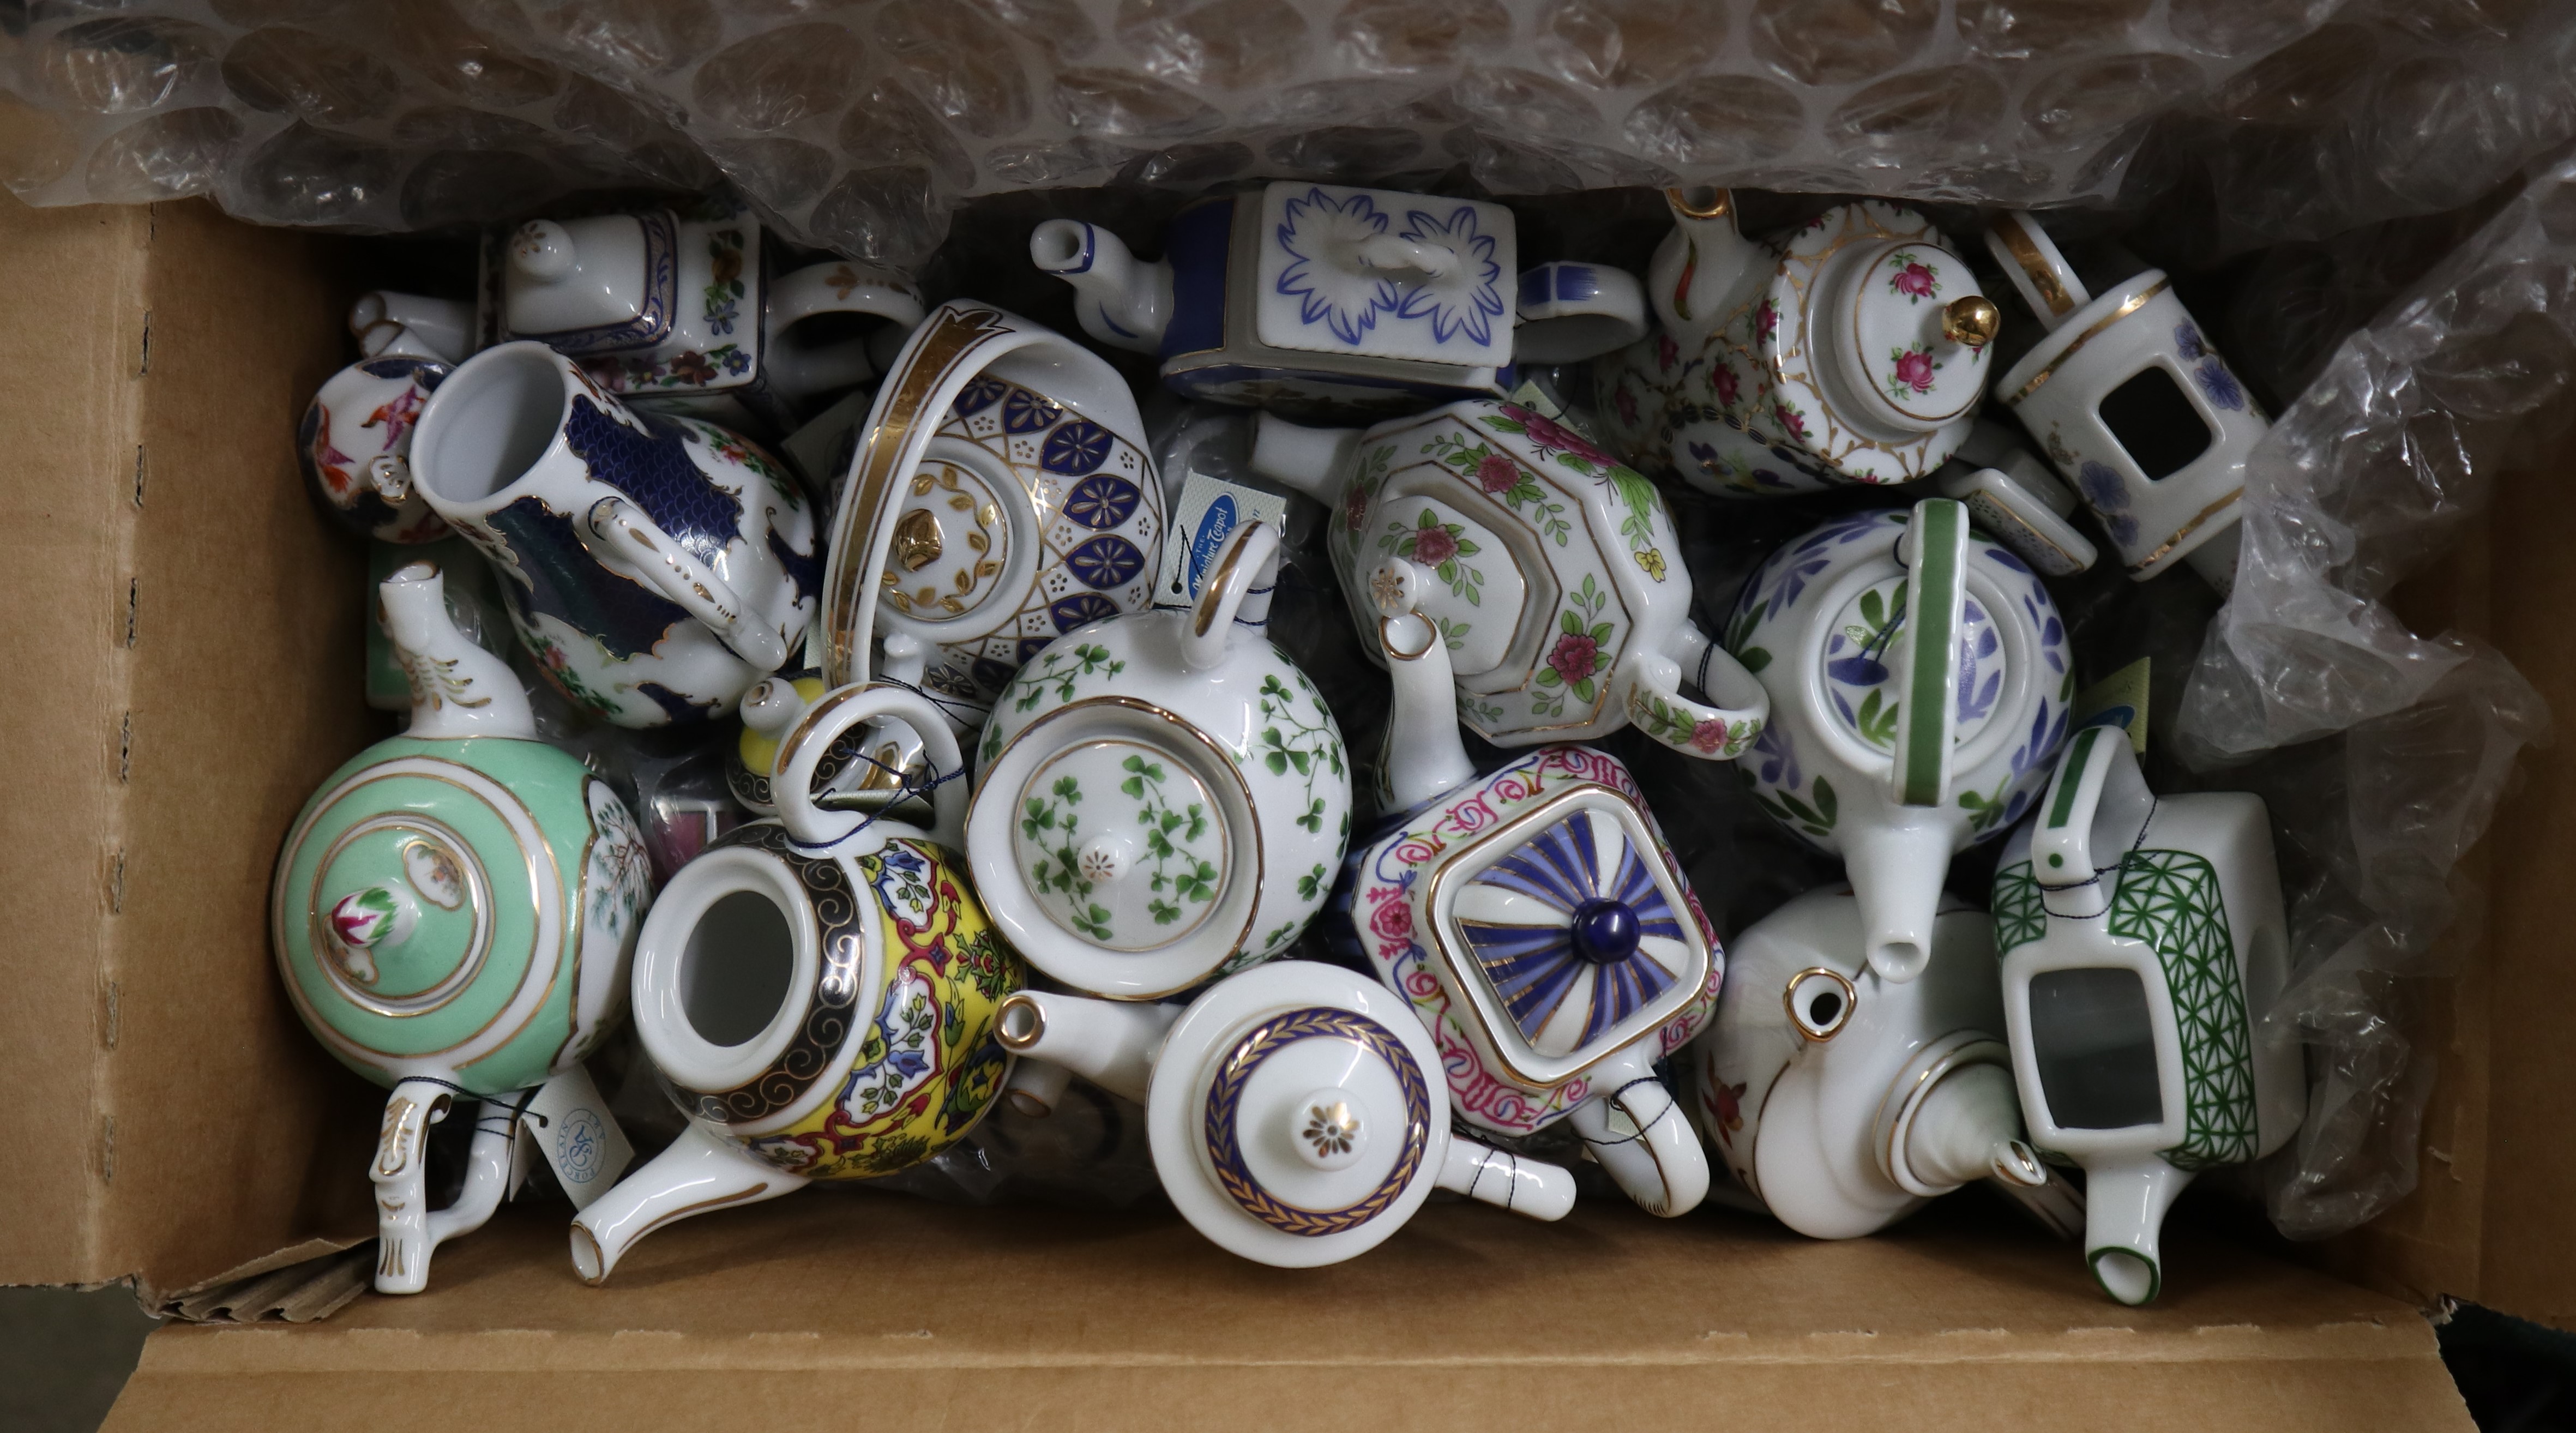 Collection of The Miniature Teapot Collection - approx 100 teapots - Image 3 of 3